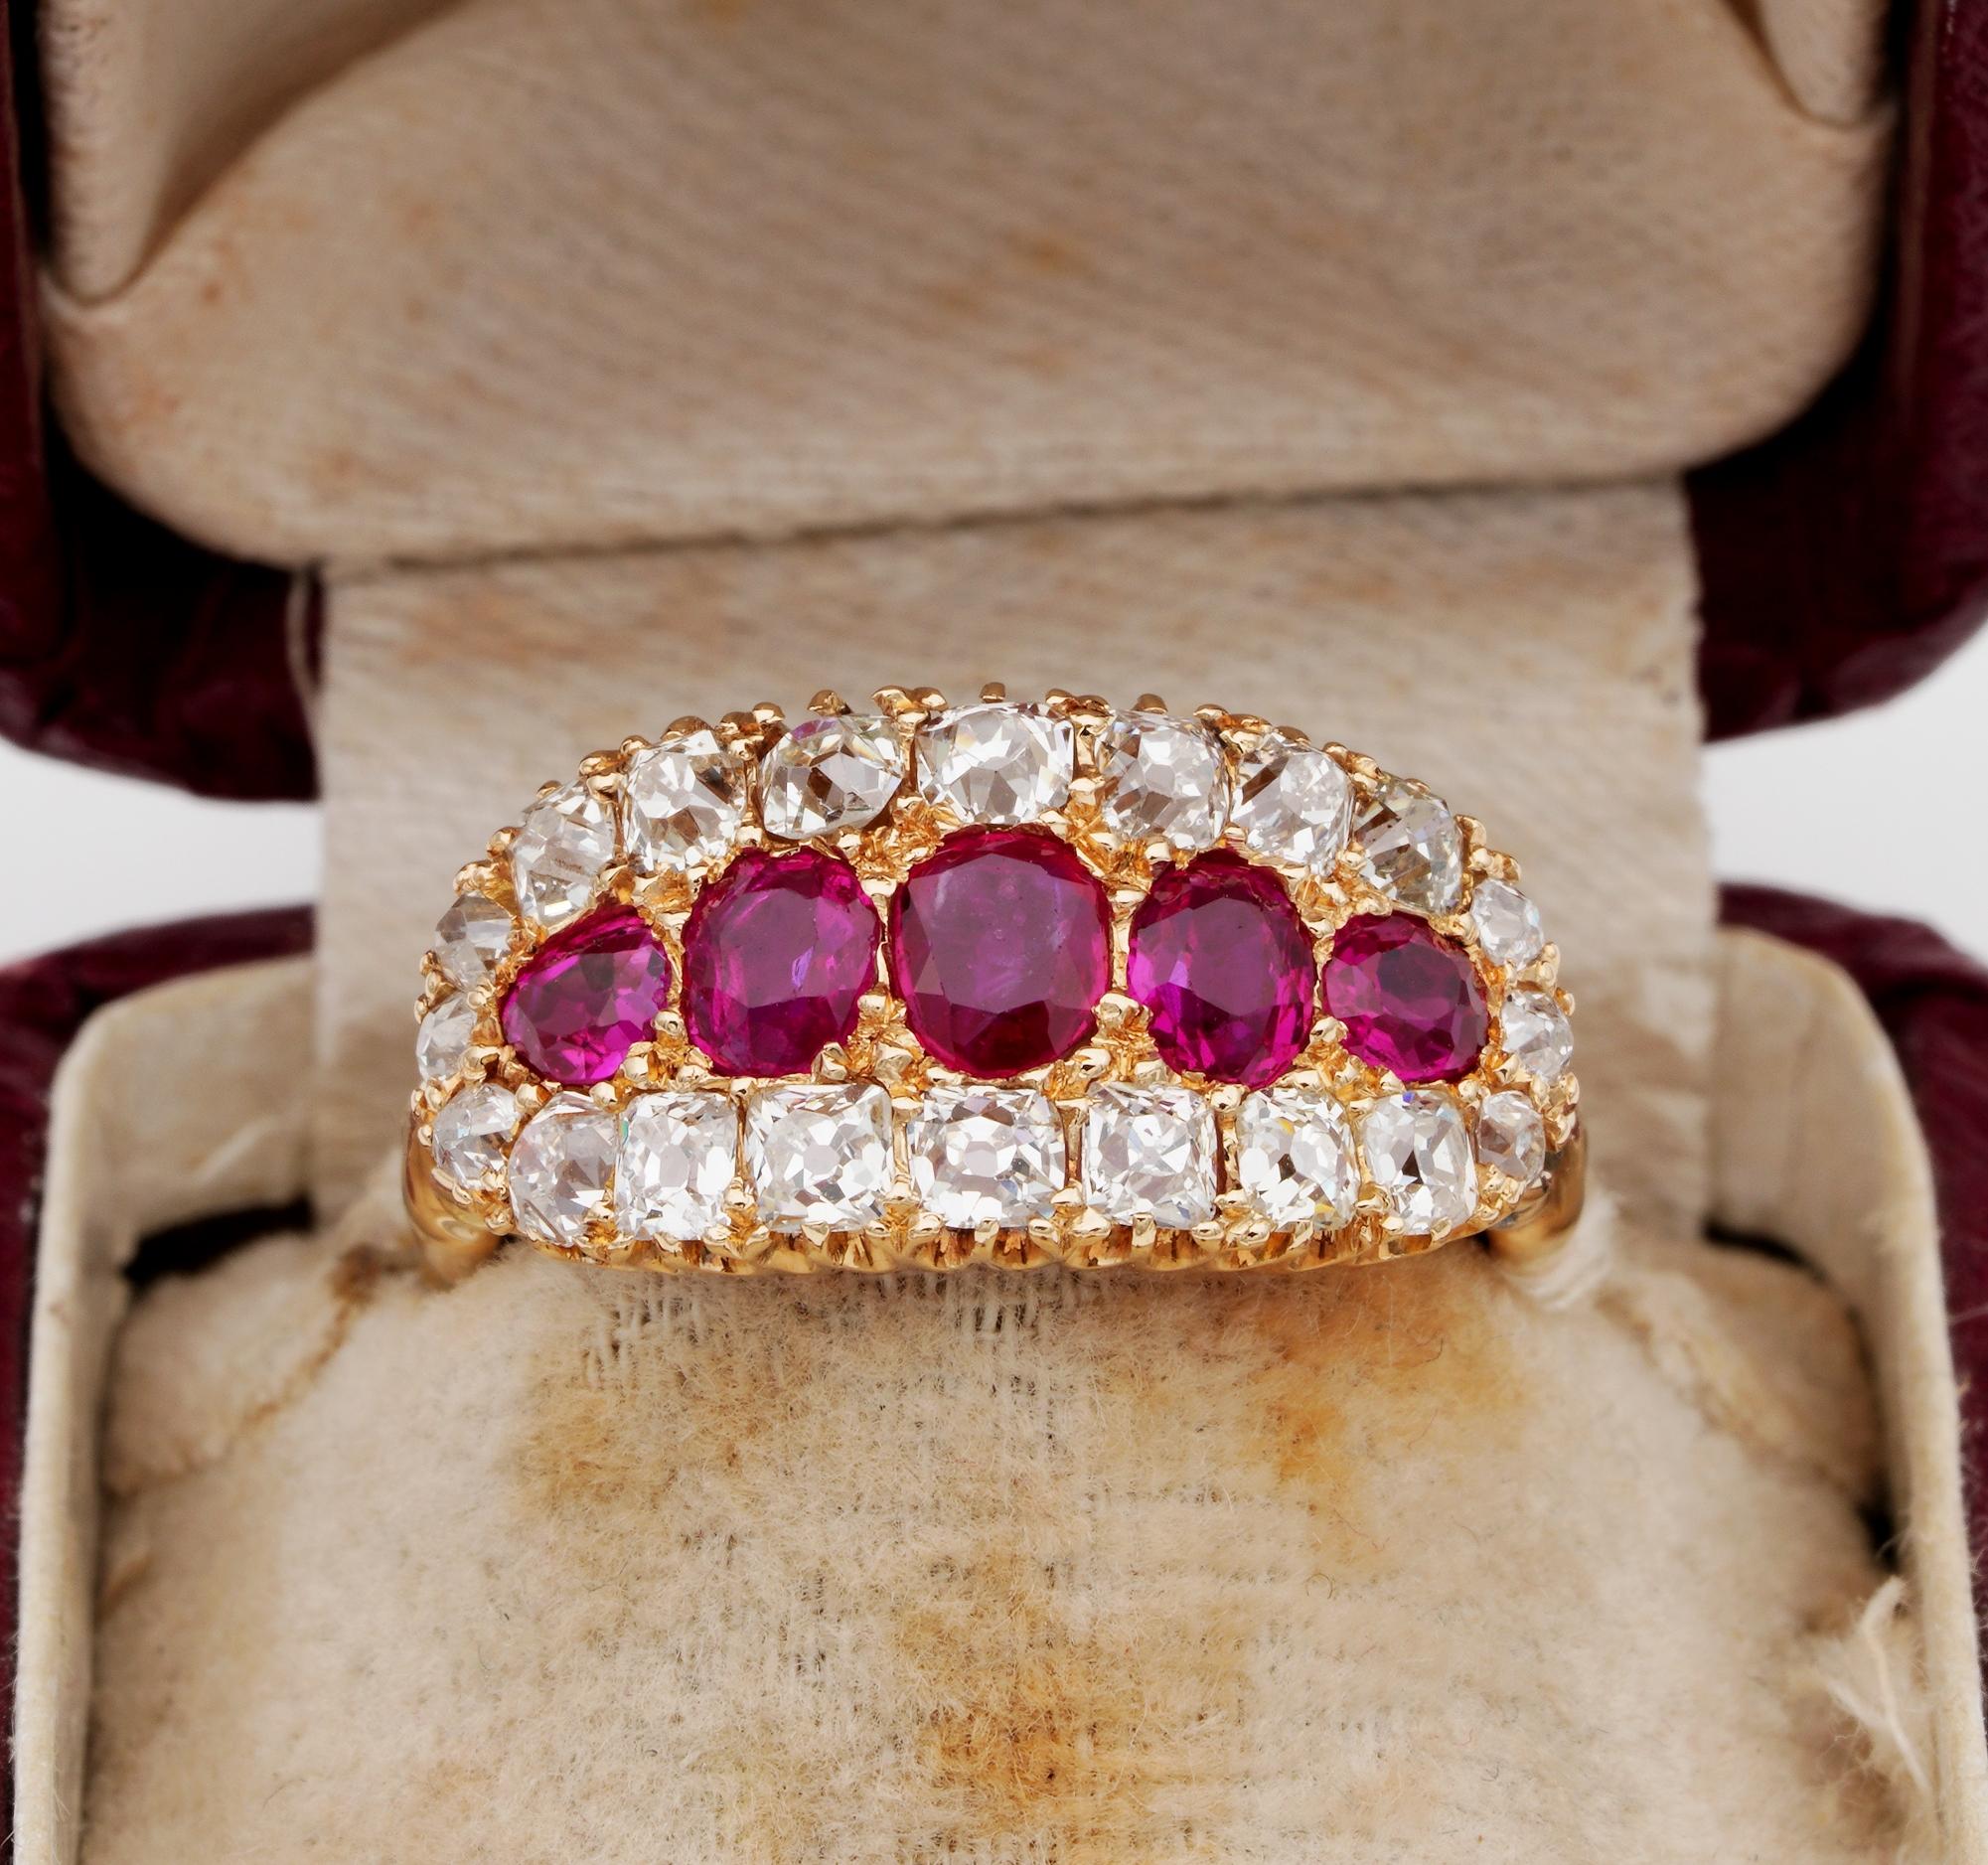 Absolute Beauty!

Exceptionally beautiful, authentic Victorian of the highest standards, rare Natural Burmese Rubies and Diamond five stone ring
Could be an outstanding engagement ring
Crafted of solid 18 KT rose gold – not marked -during